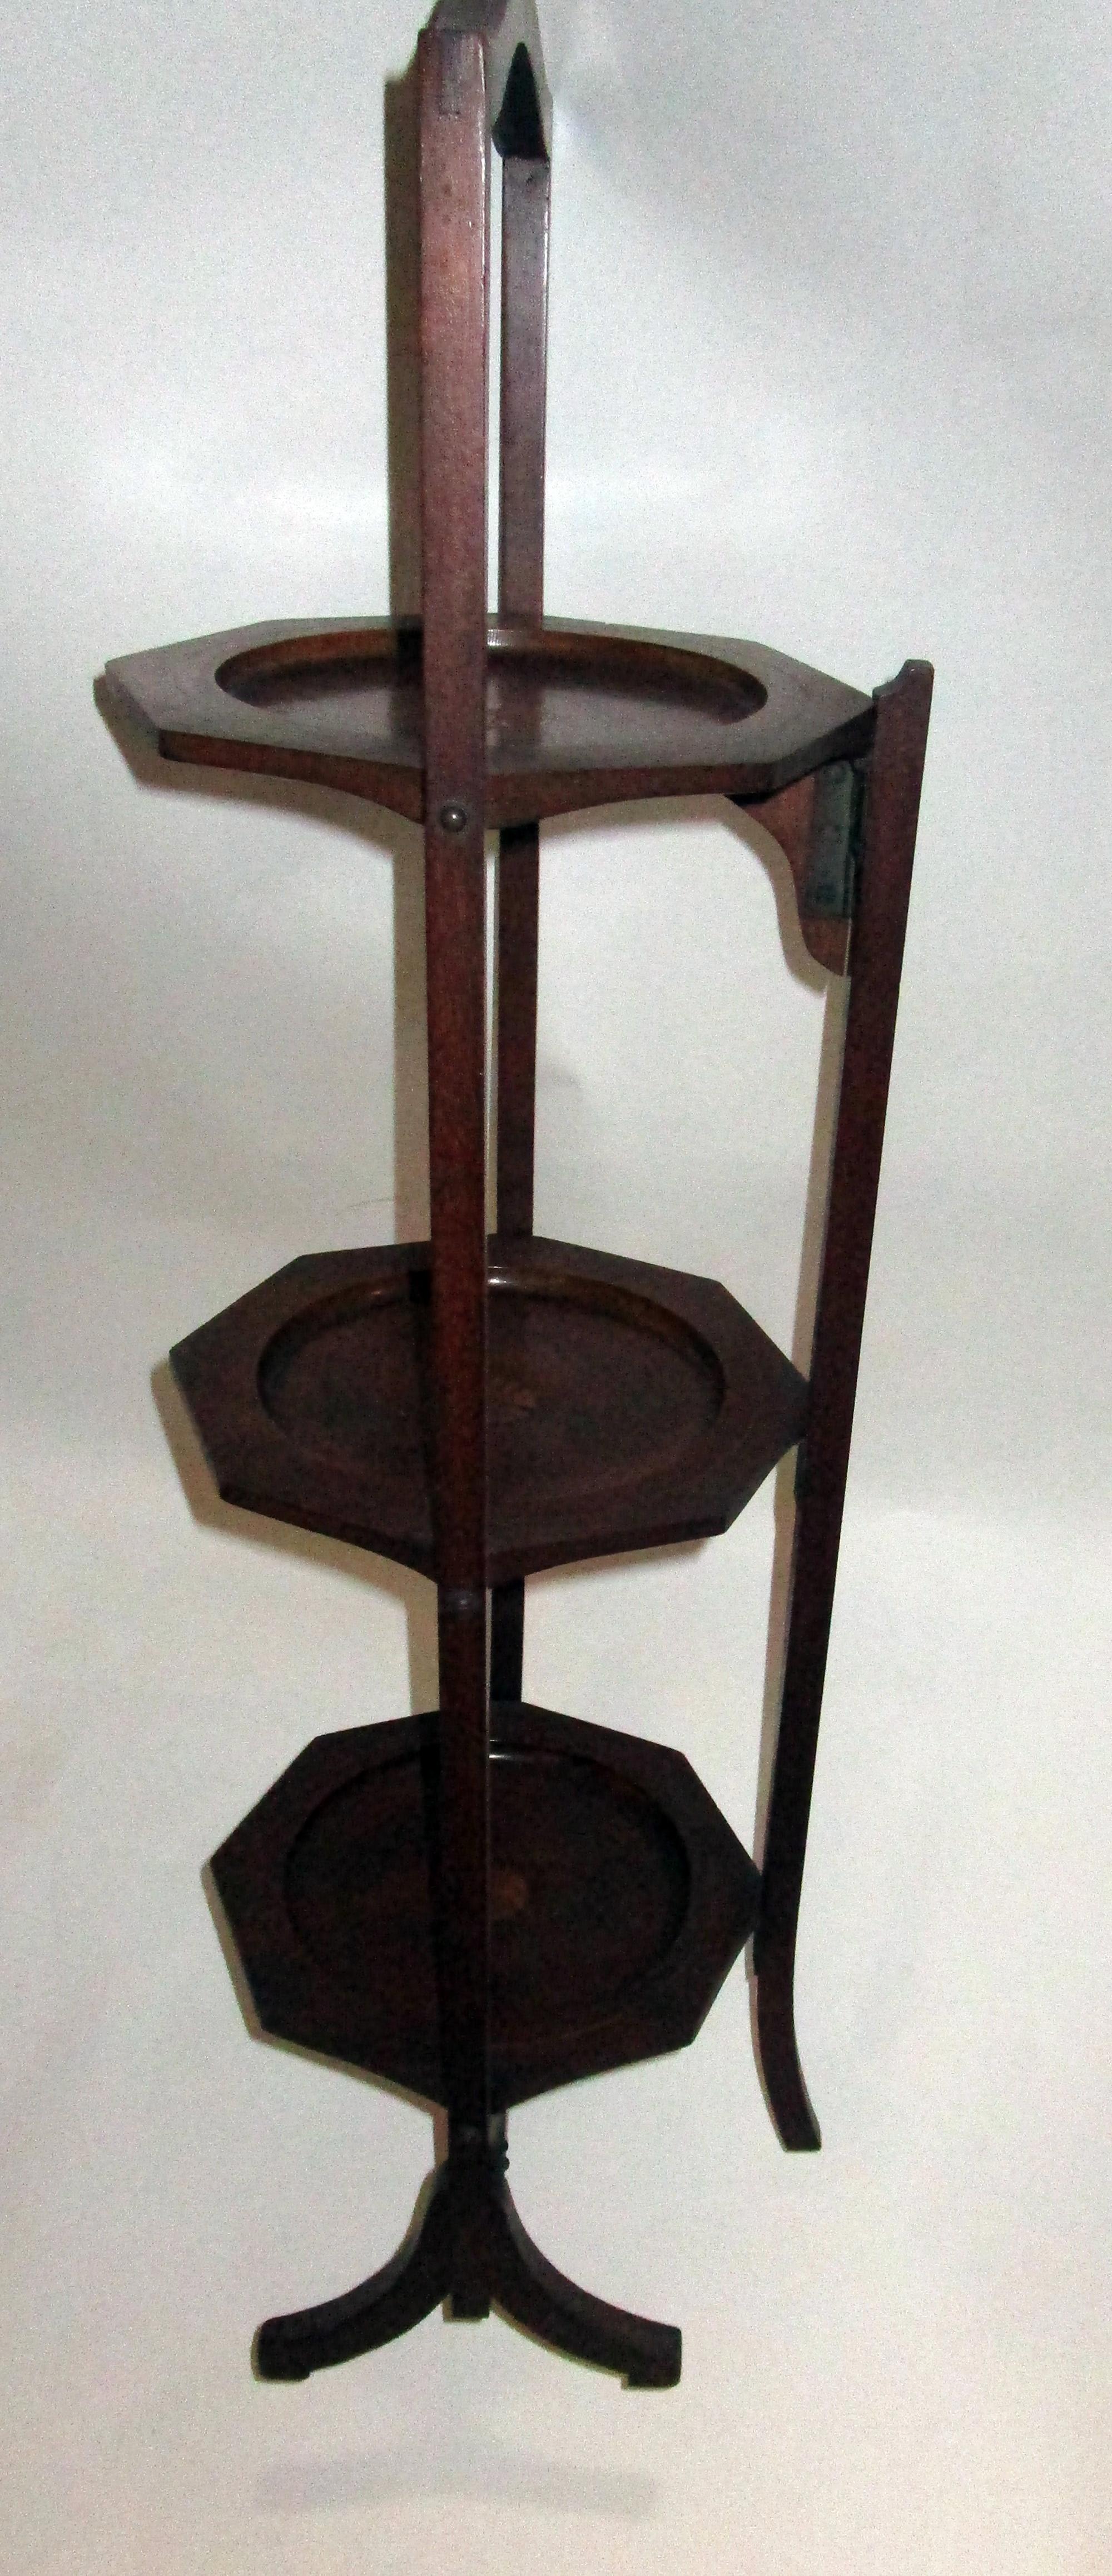 19th century Regency Mahogany Side Table or Muffin Stand (Englisch)